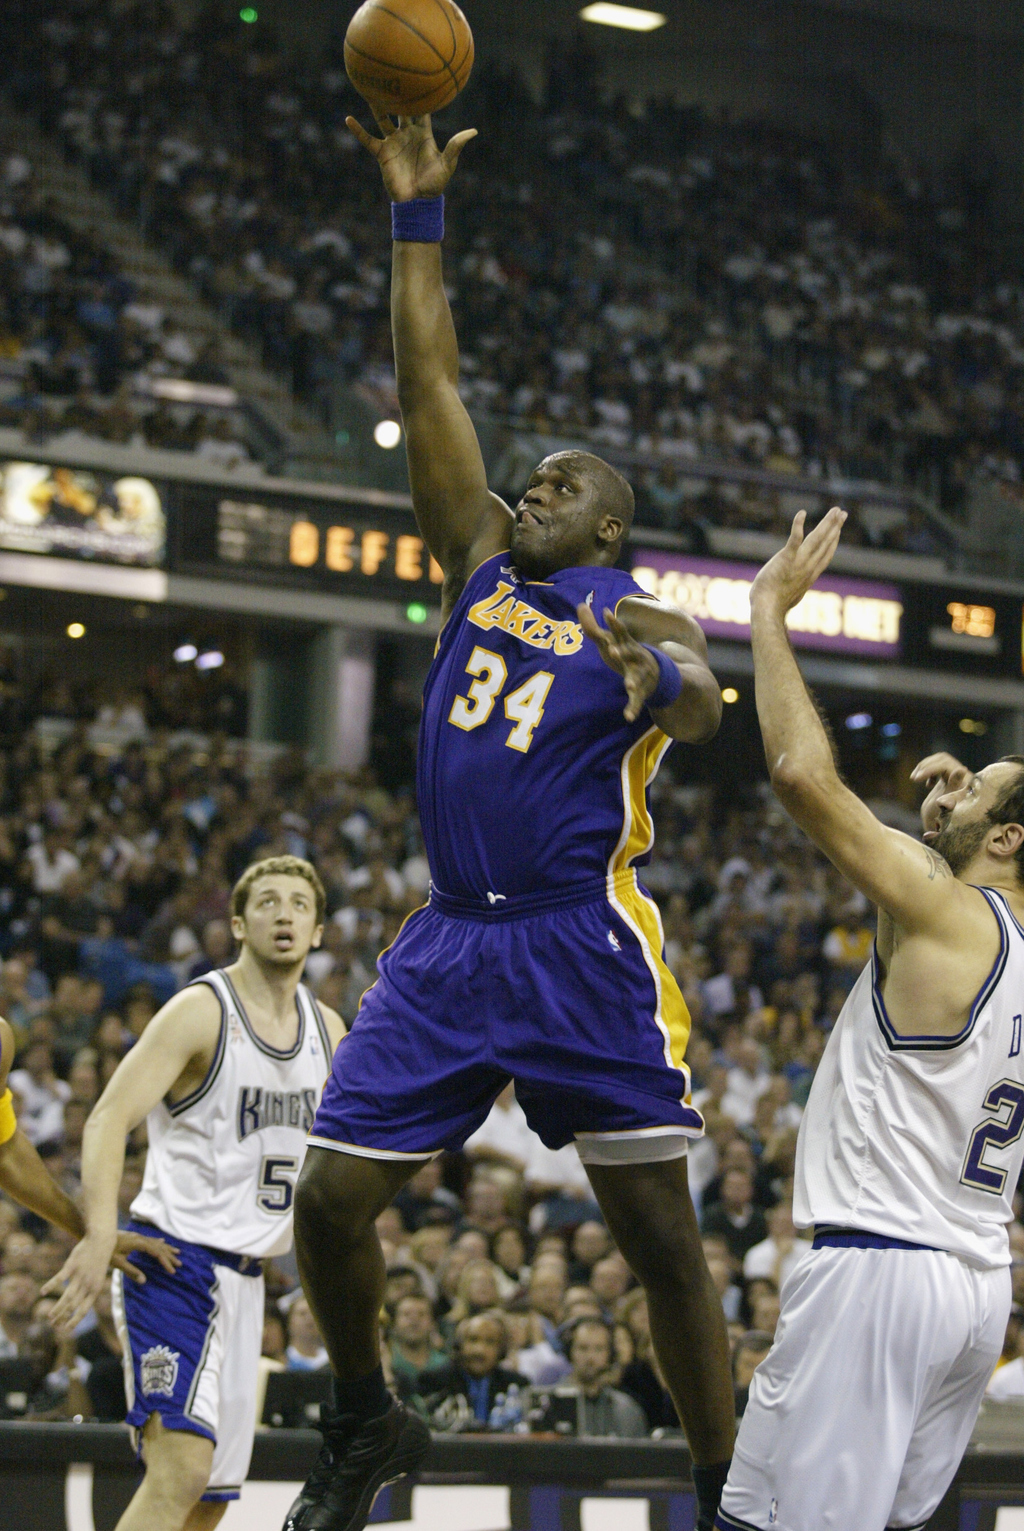 Shaq, New Part-Owner Of NBA's Kings, Says He'll Help Turn Sacramento Into A Global Brand